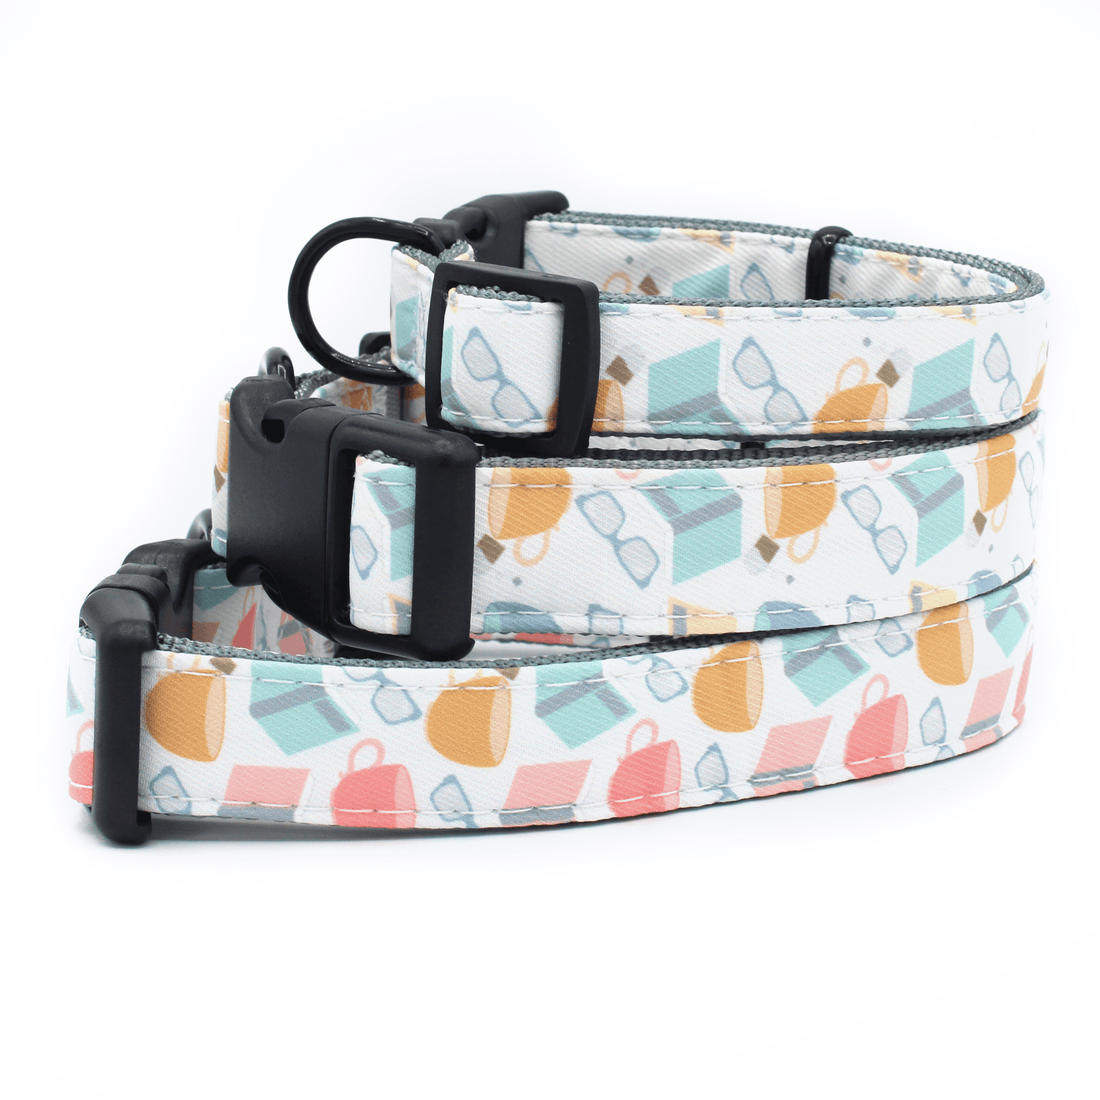 3 collars stacked on top of each other, all featuring a book themed pattern